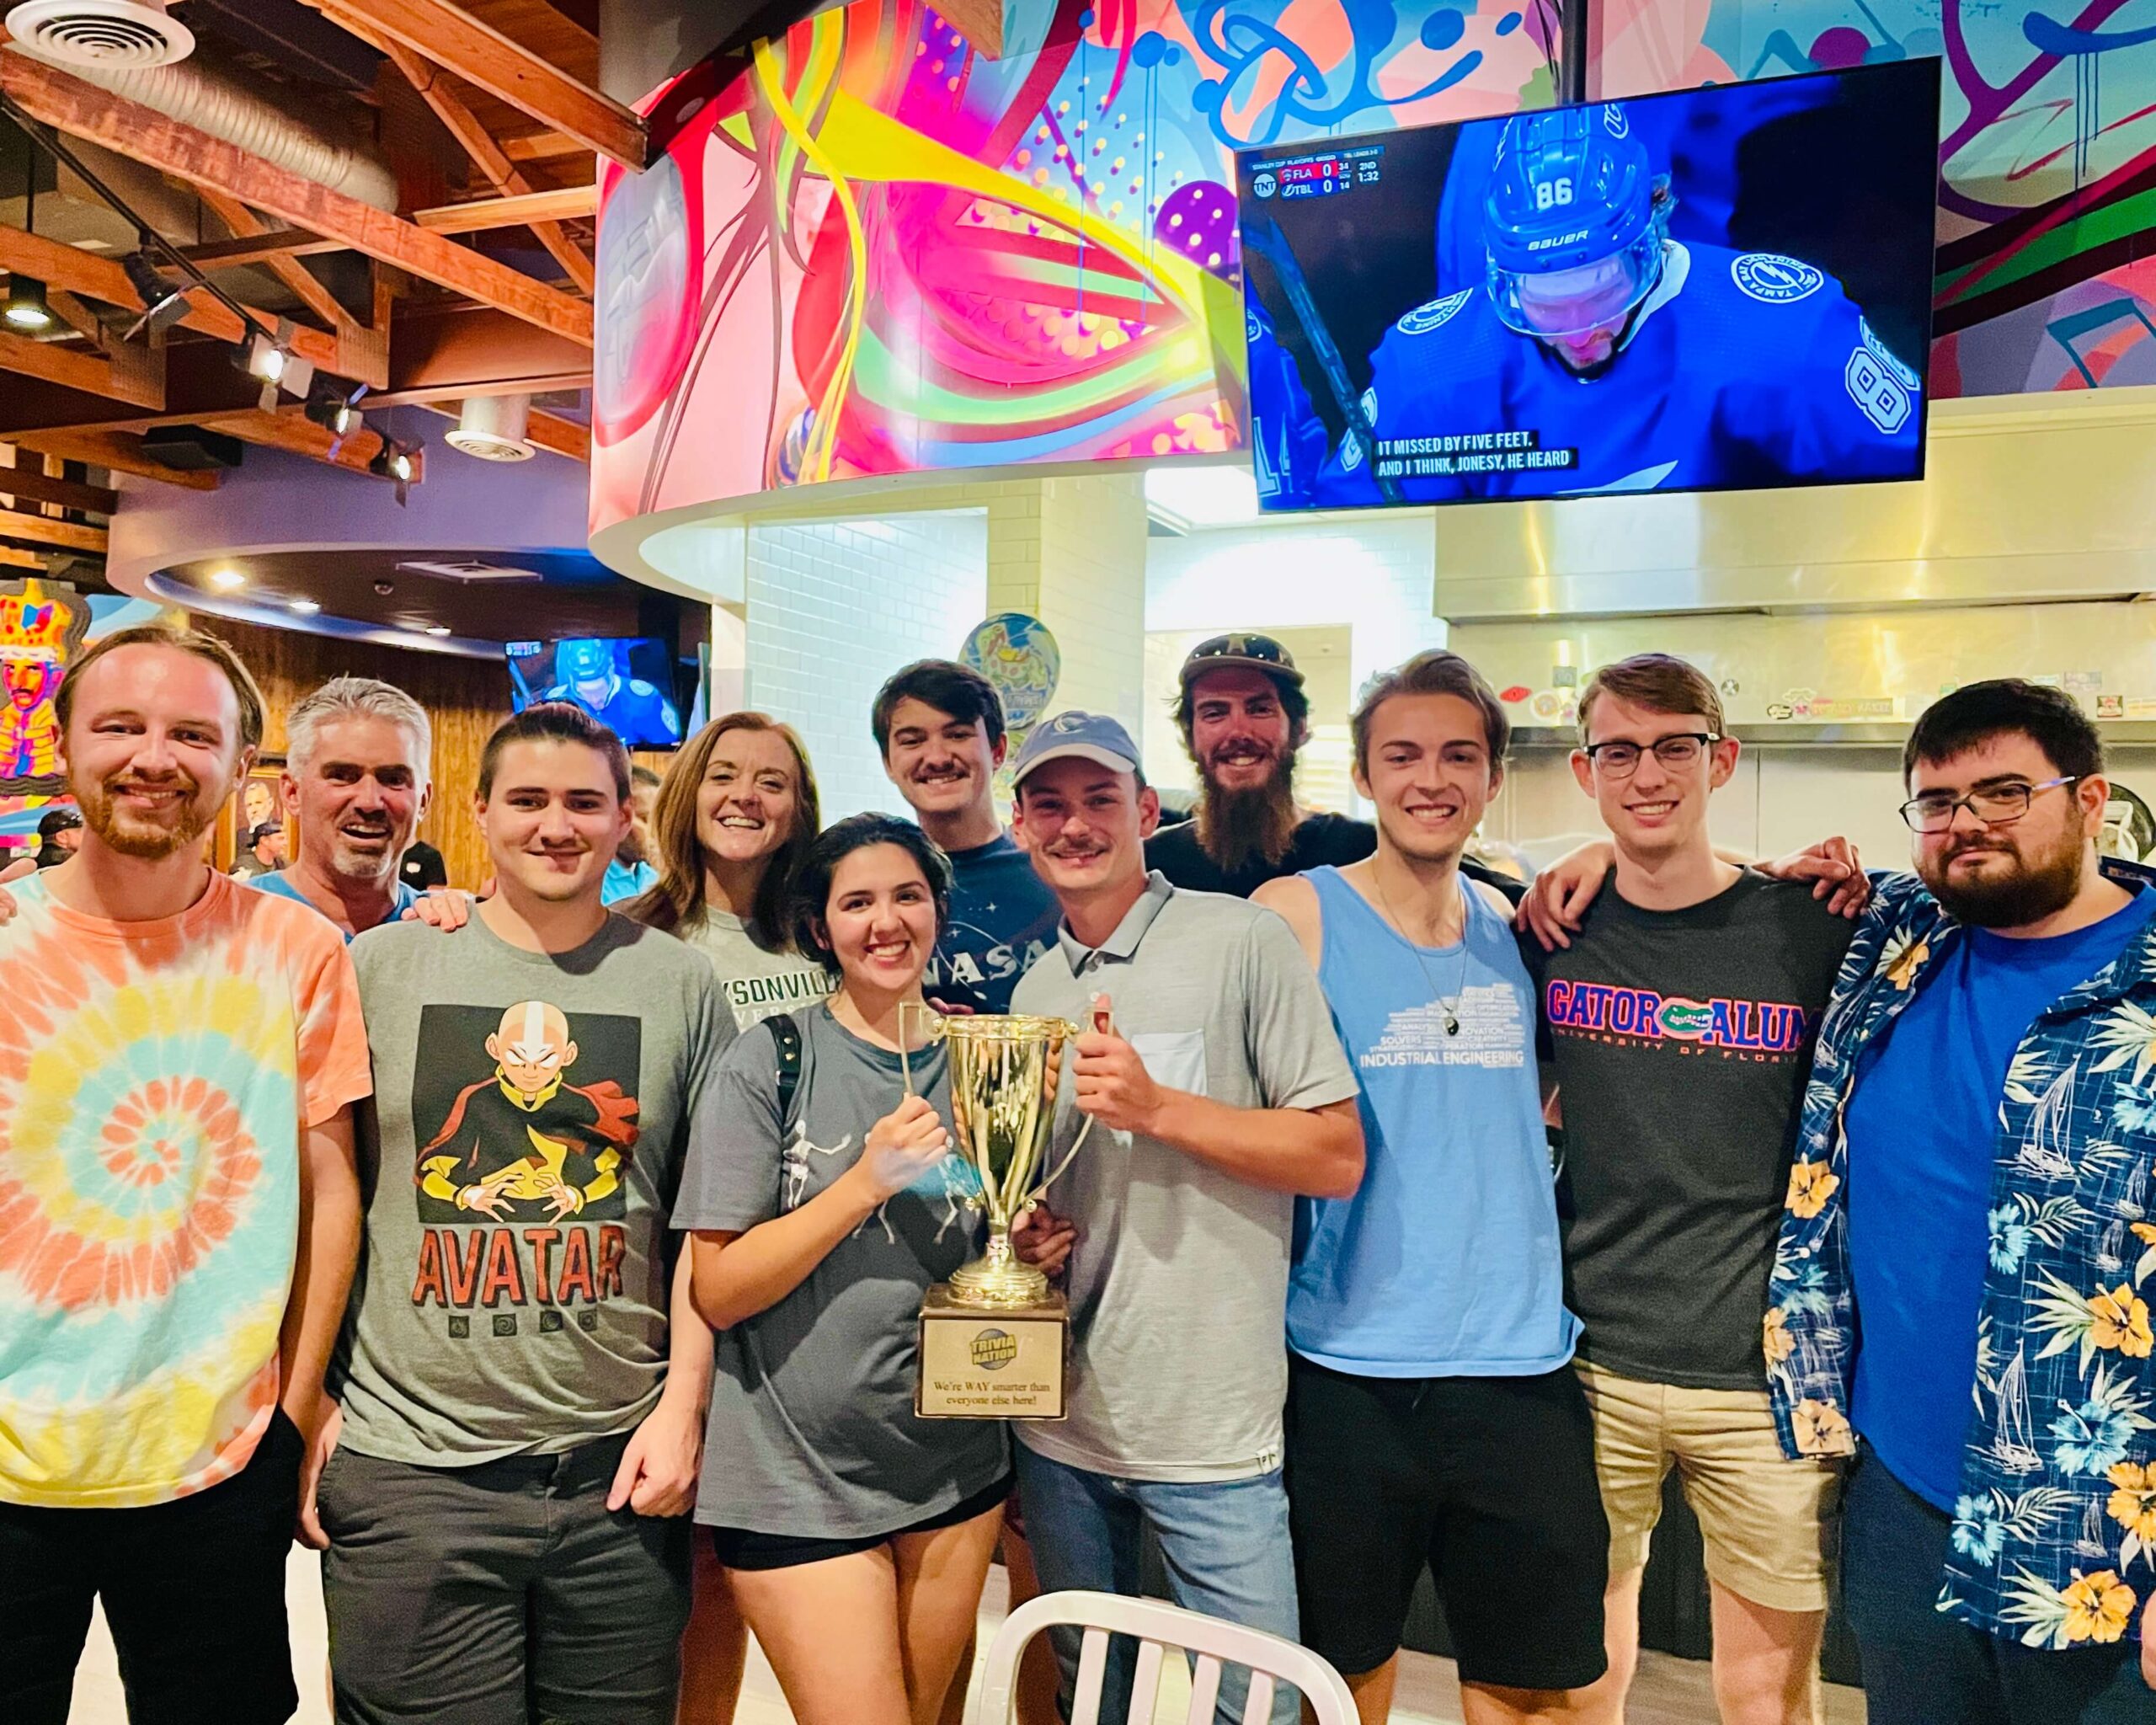 Mellow Mushroom Fleming Island FL 32003 trivia night: large group of young people all standing together smiling while the young woman and man in the middle hold up a Trivia Nation trophy and with a wall above them showing graffiti art and a TV showing hockey